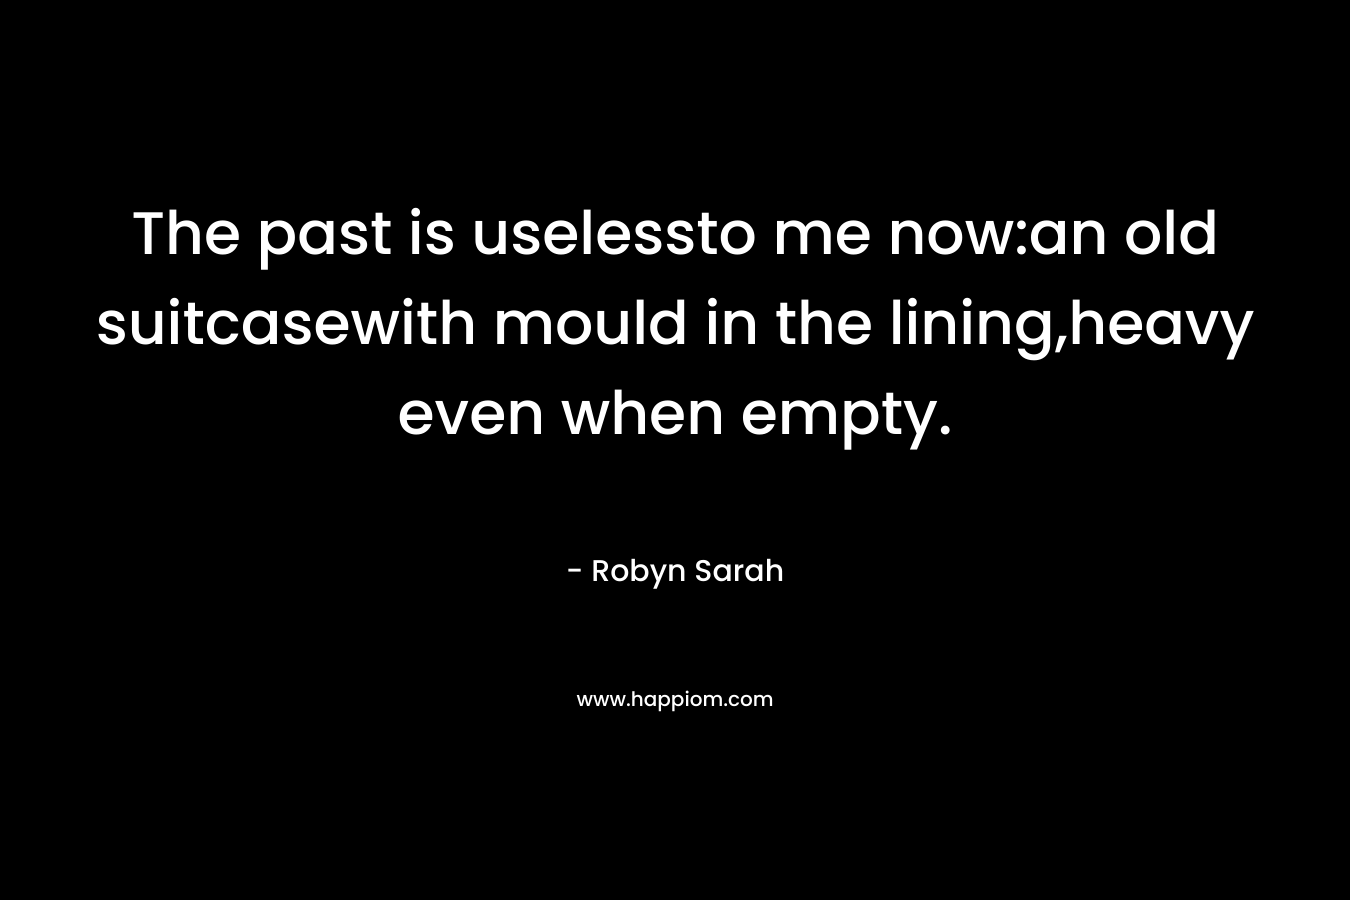 The past is uselessto me now:an old suitcasewith mould in the lining,heavy even when empty. – Robyn Sarah